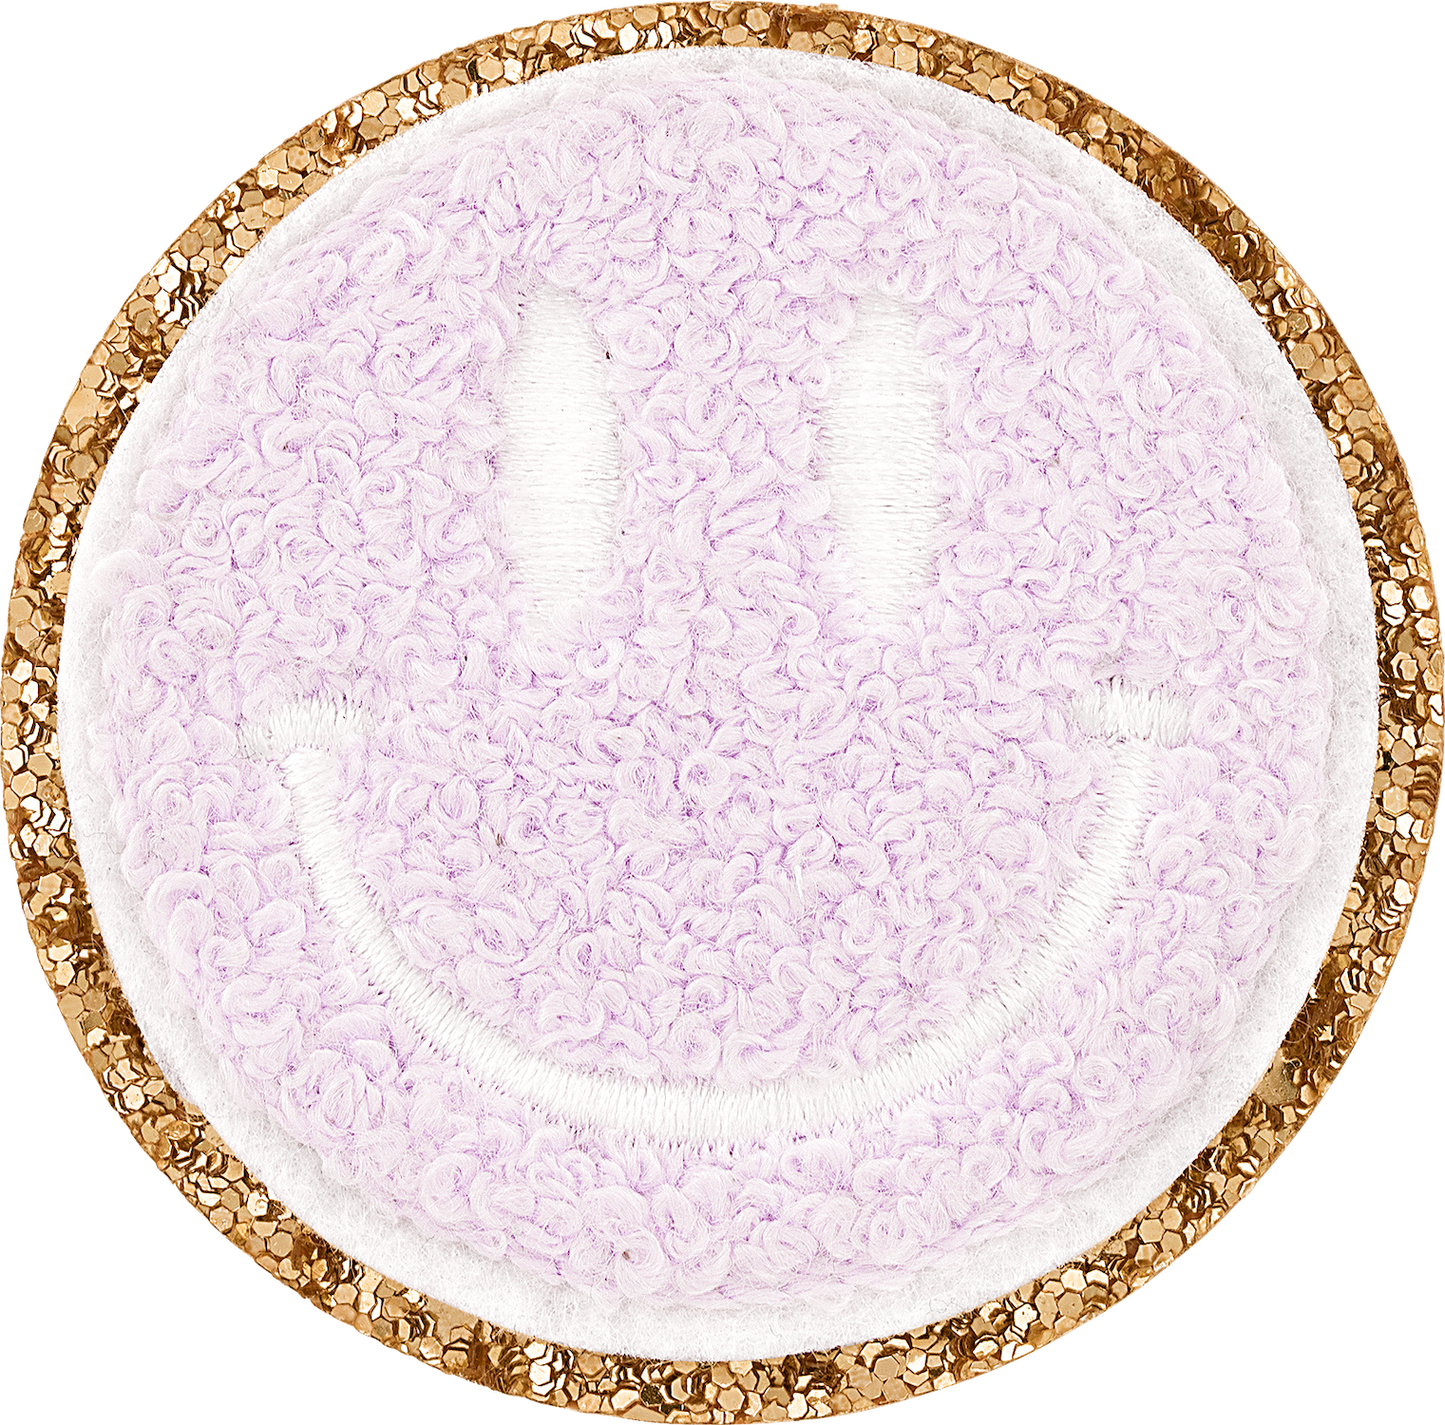 Glitter Smiley Face Patch